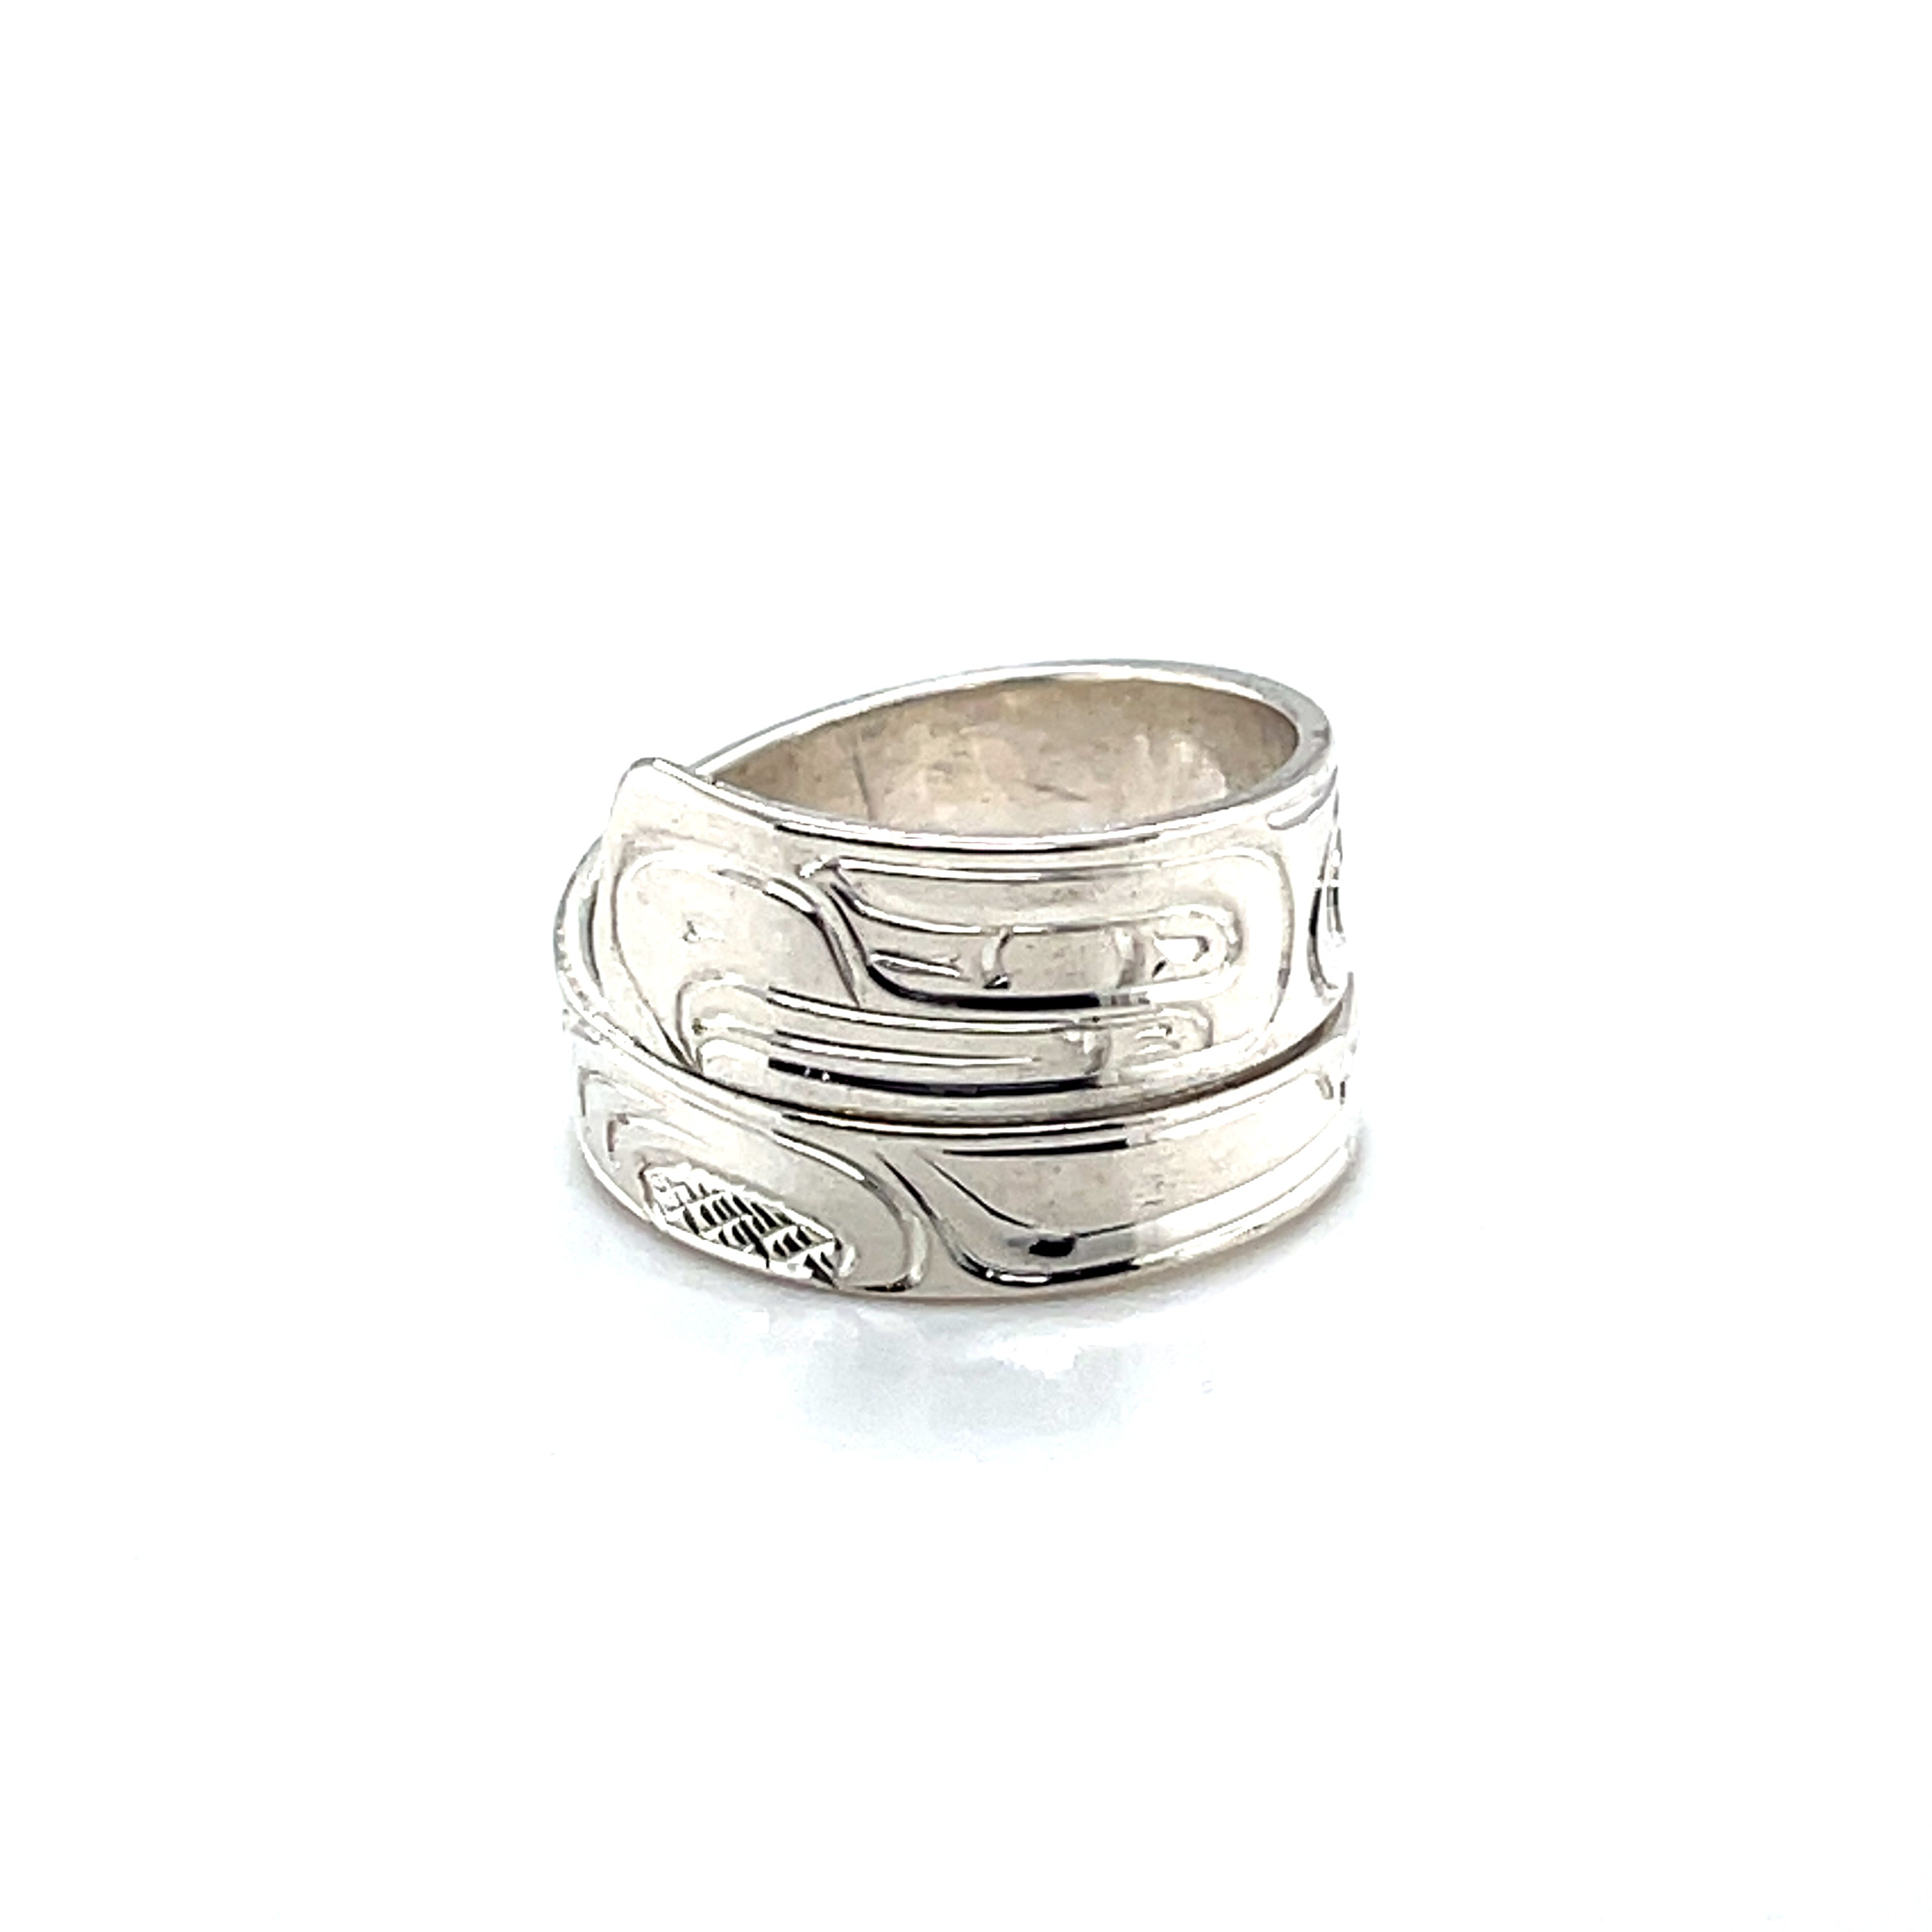 Ring - Sterling Silver - Wrap - Eagle - Size 6